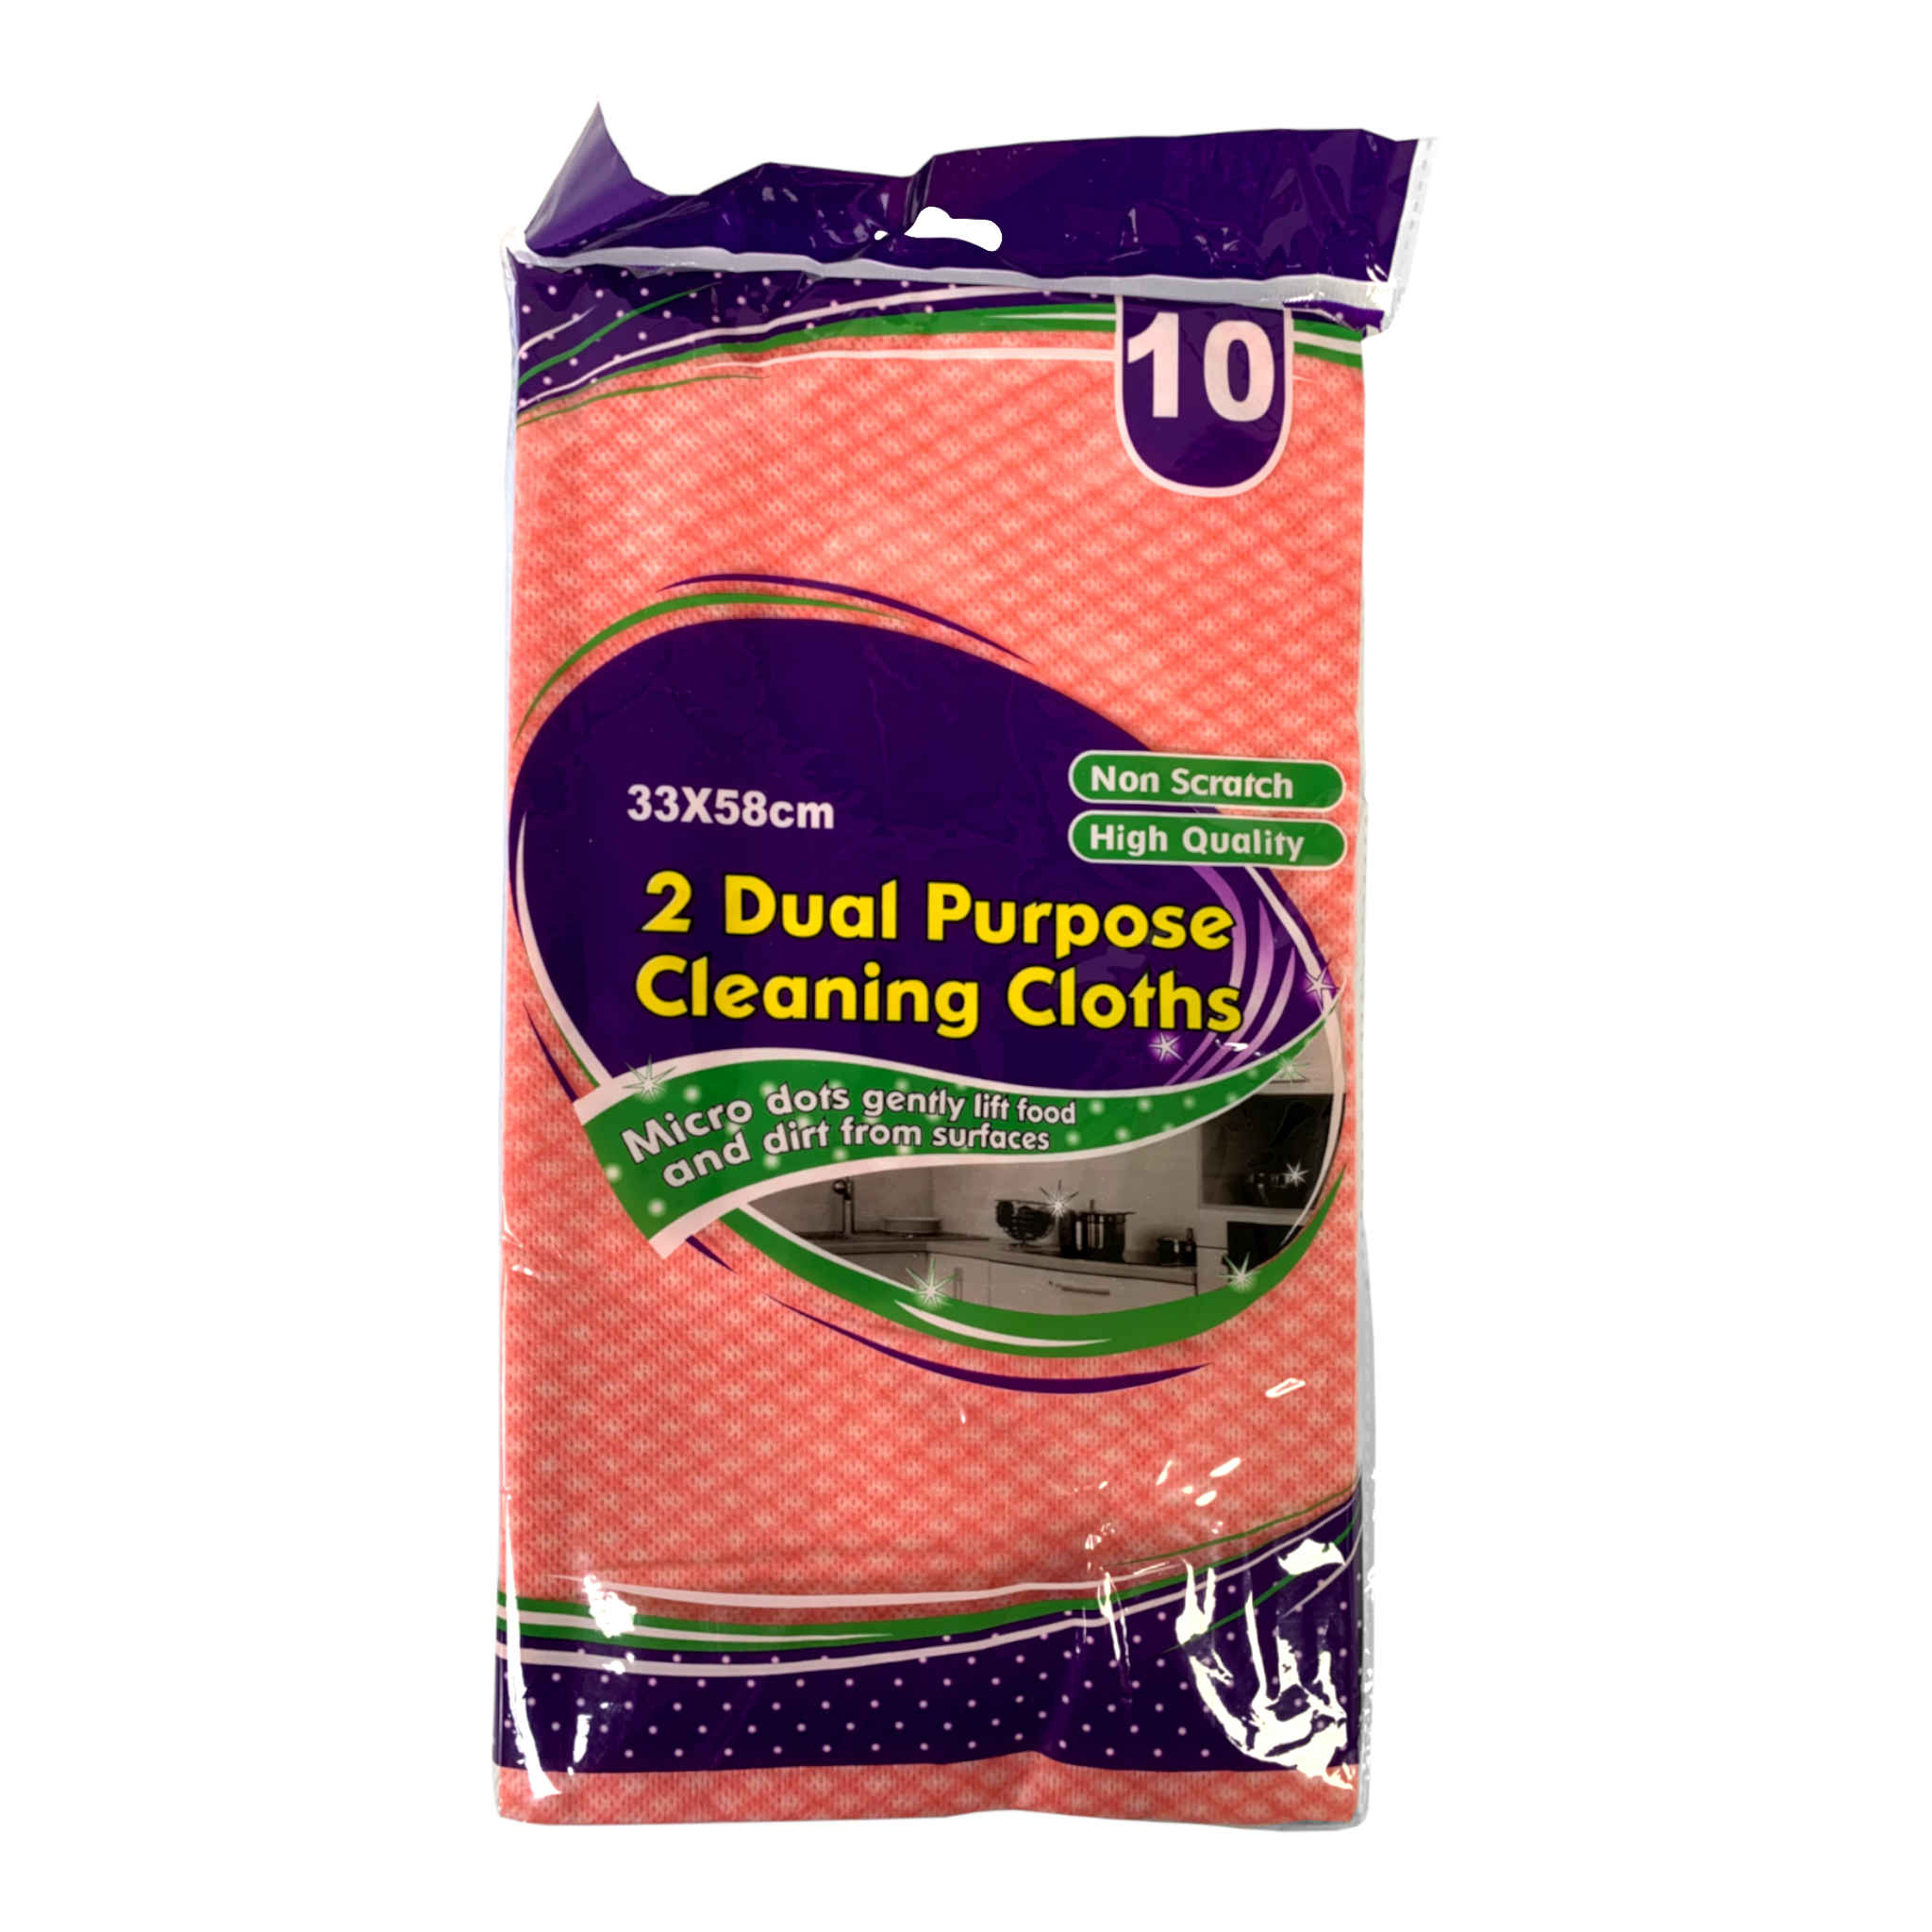 High Quality Cleaning Cloth | Dual Purpose | 10 Pack